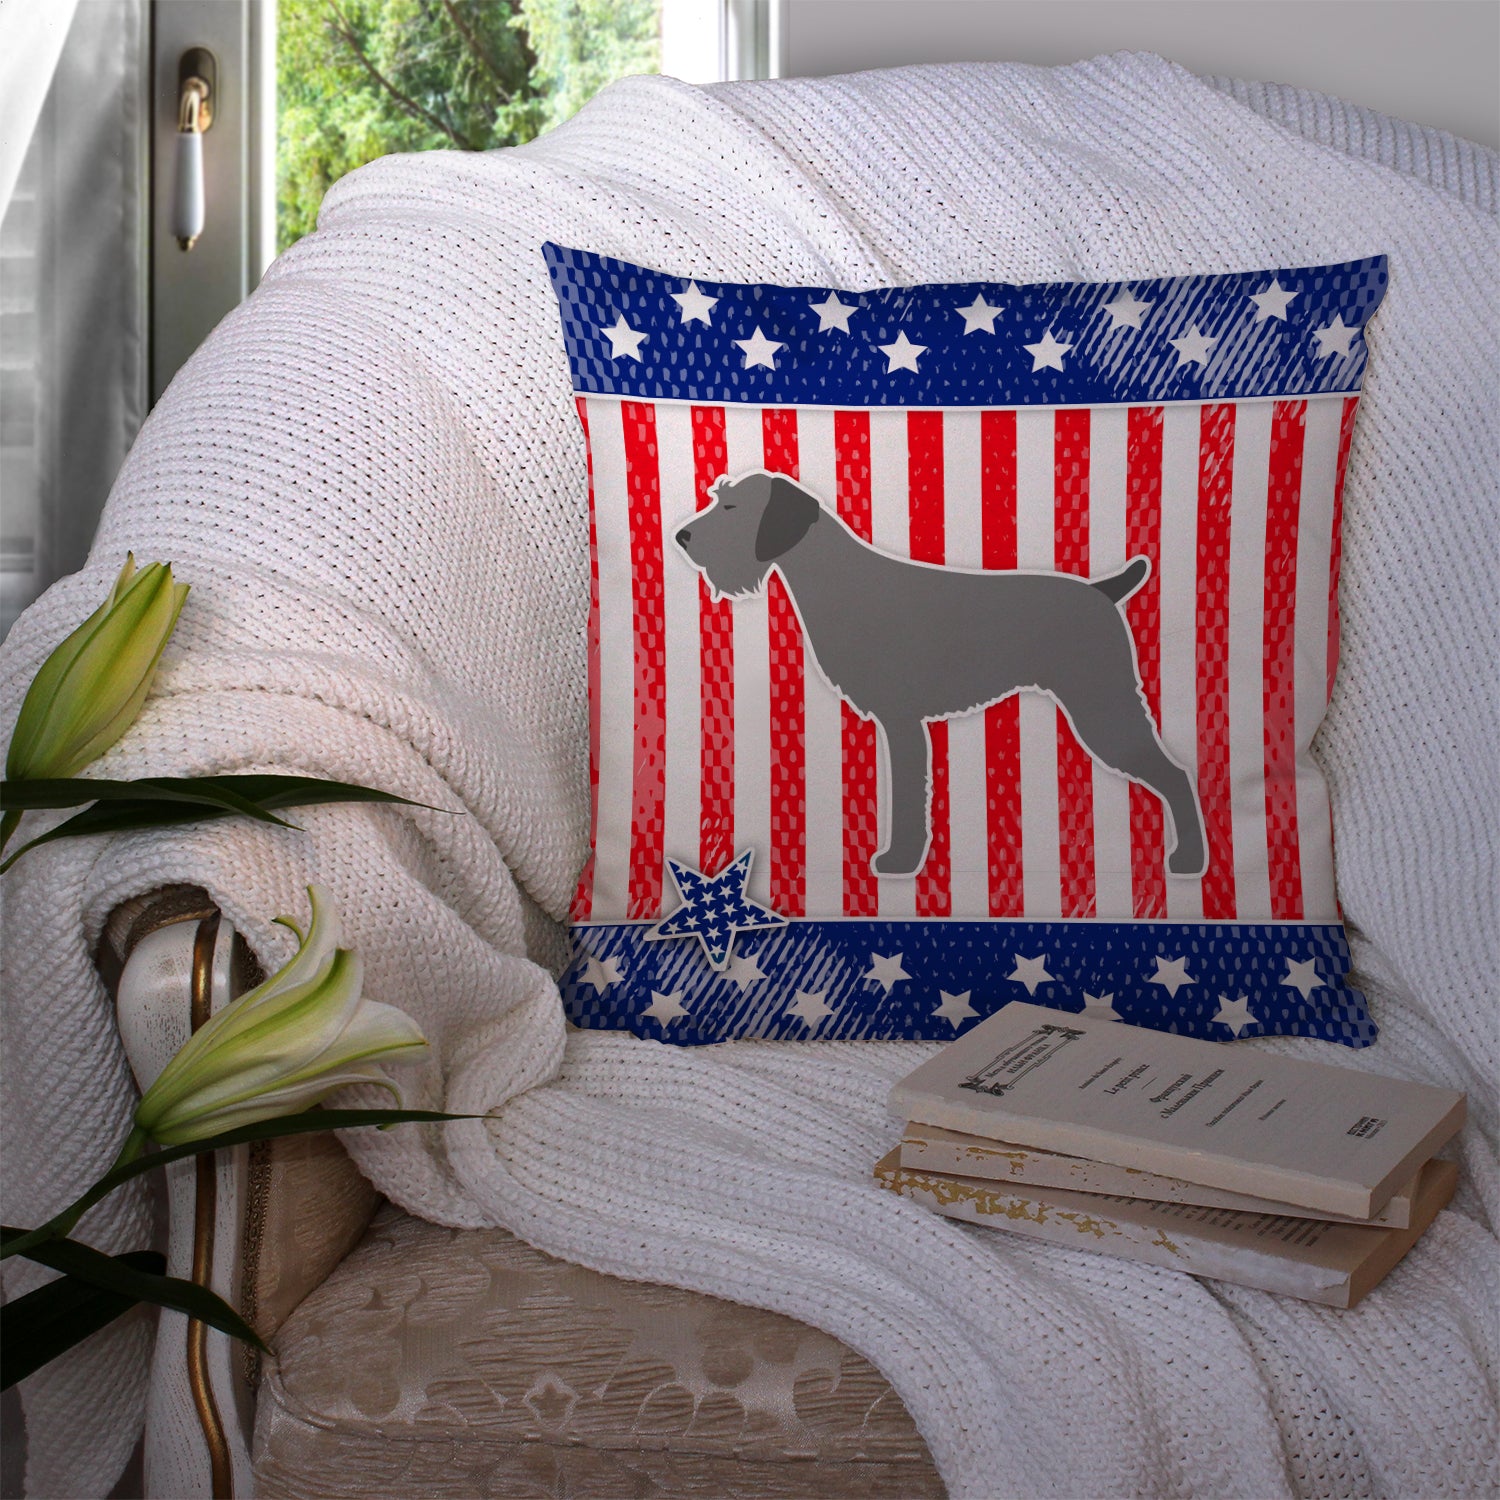 USA Patriotic German Wirehaired Pointer Fabric Decorative Pillow BB3311PW1414 - the-store.com